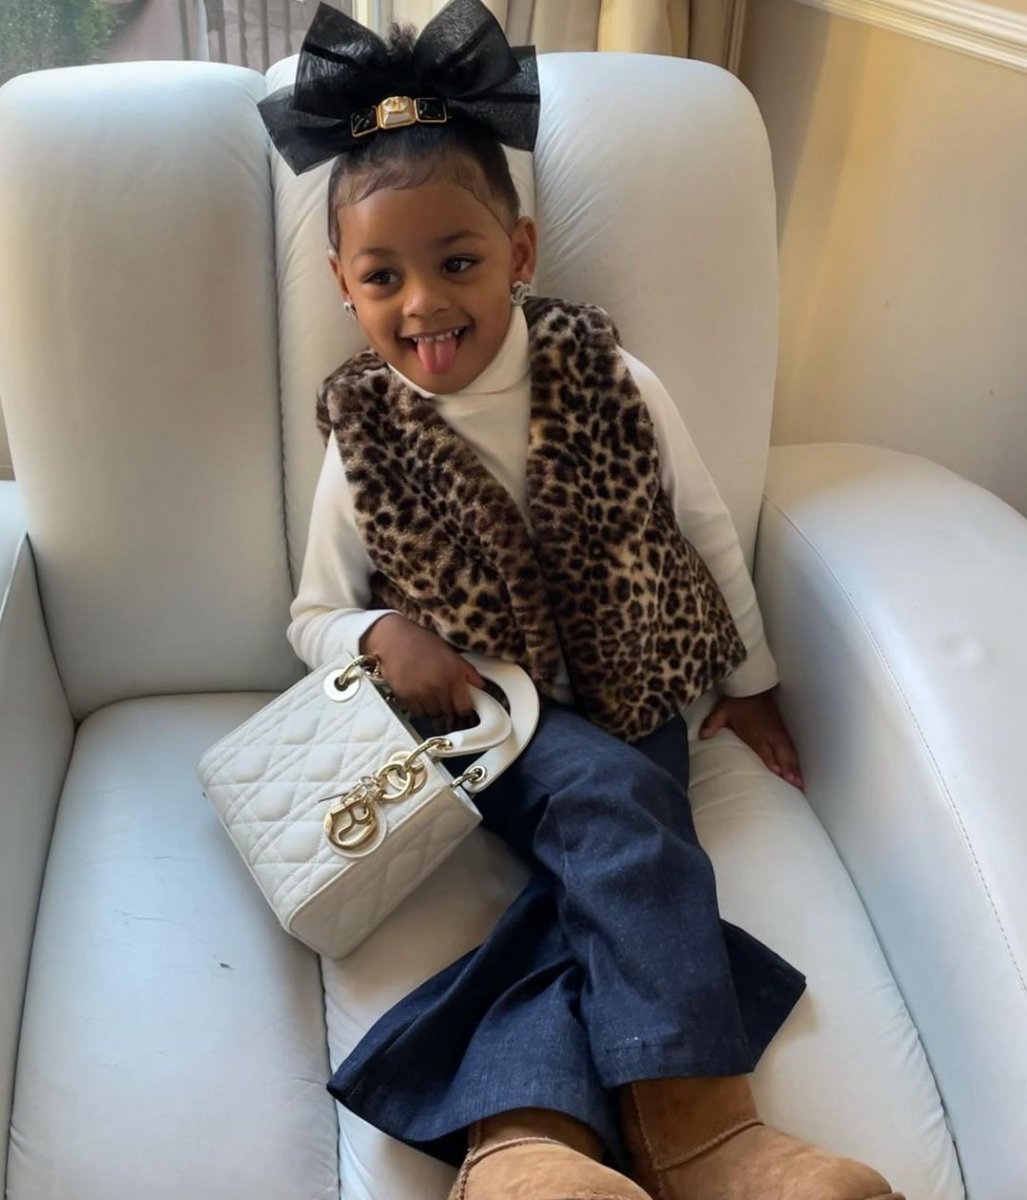 Cardi B bought 7 luxury bags for her 2-year-old daughter #2